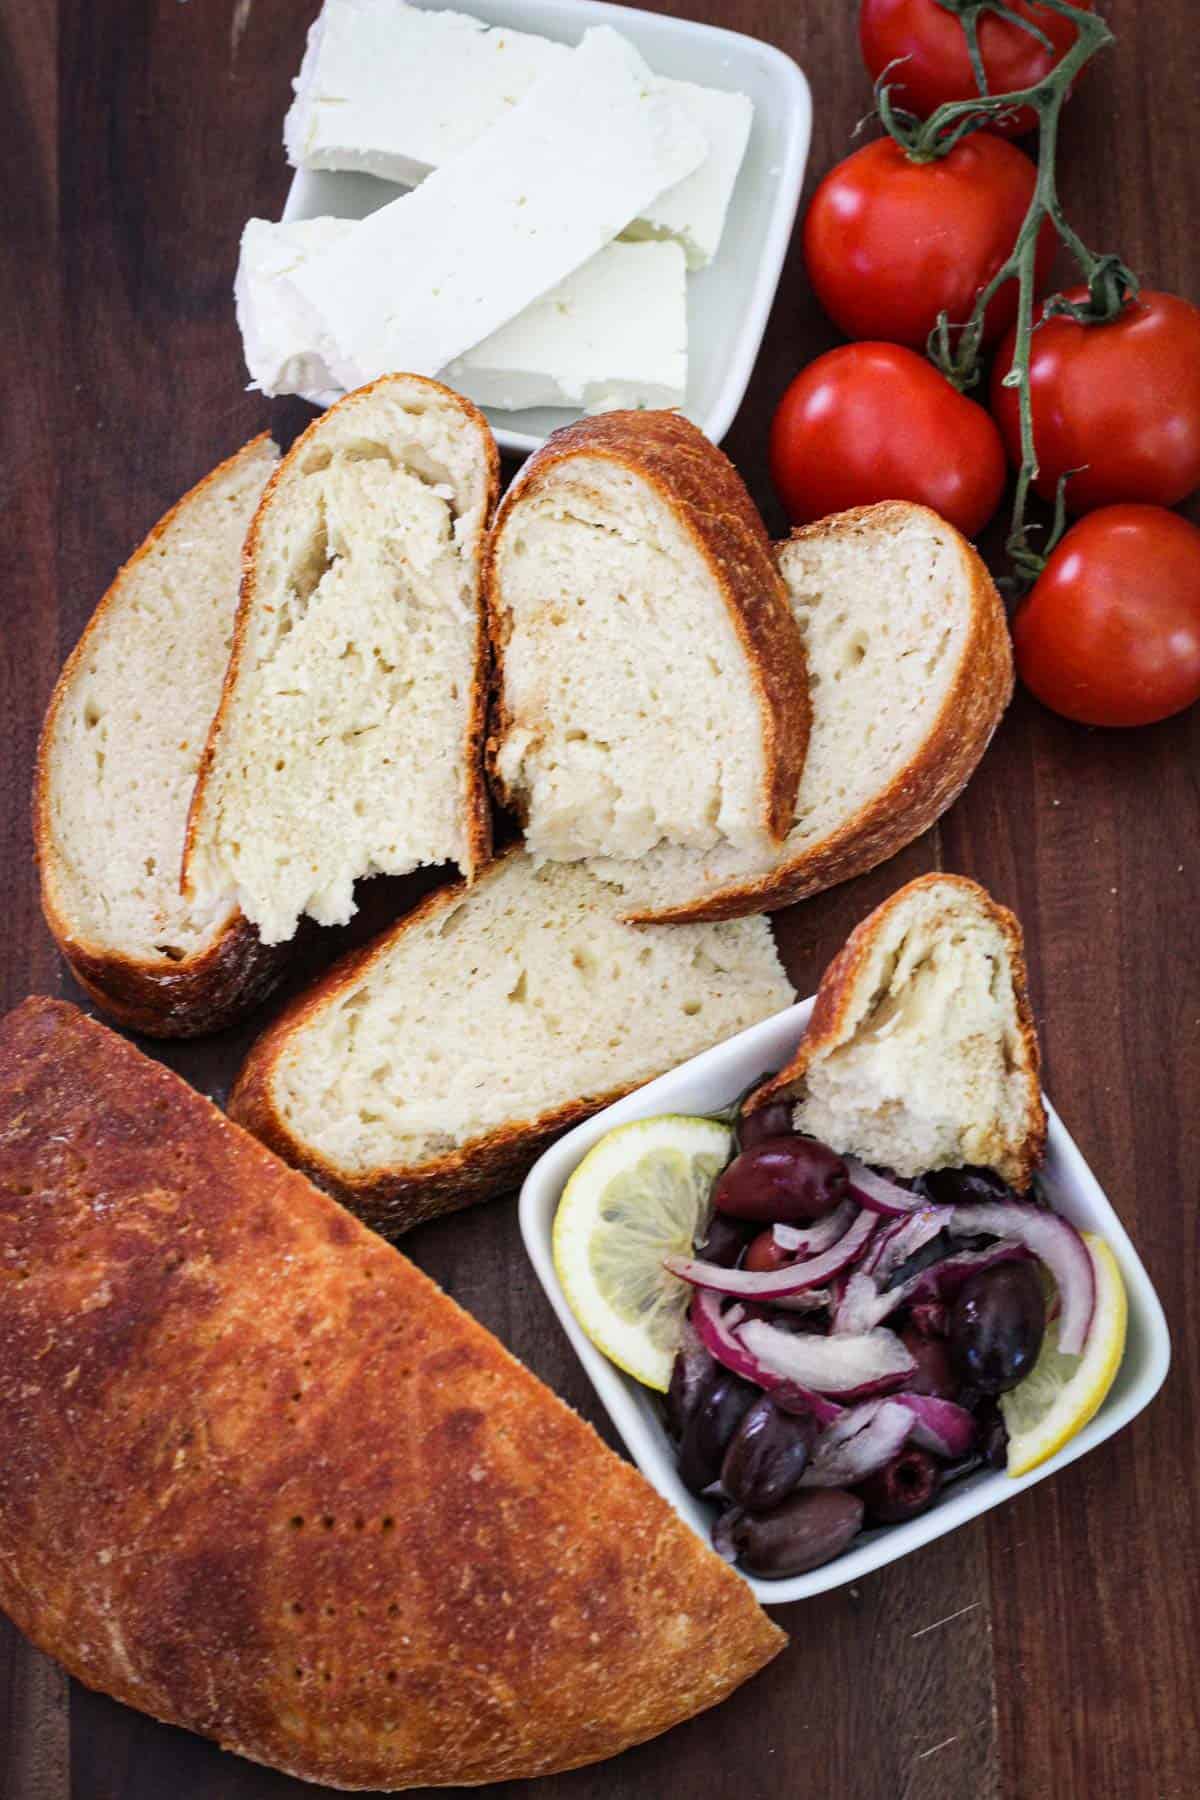 A cutting board with Albanian bread on it. Bread is cut in half, half is untouched in the corner and the other half is cut in slices. Then around the bread you see an olive appetizer, feta cheese and tomatoes.